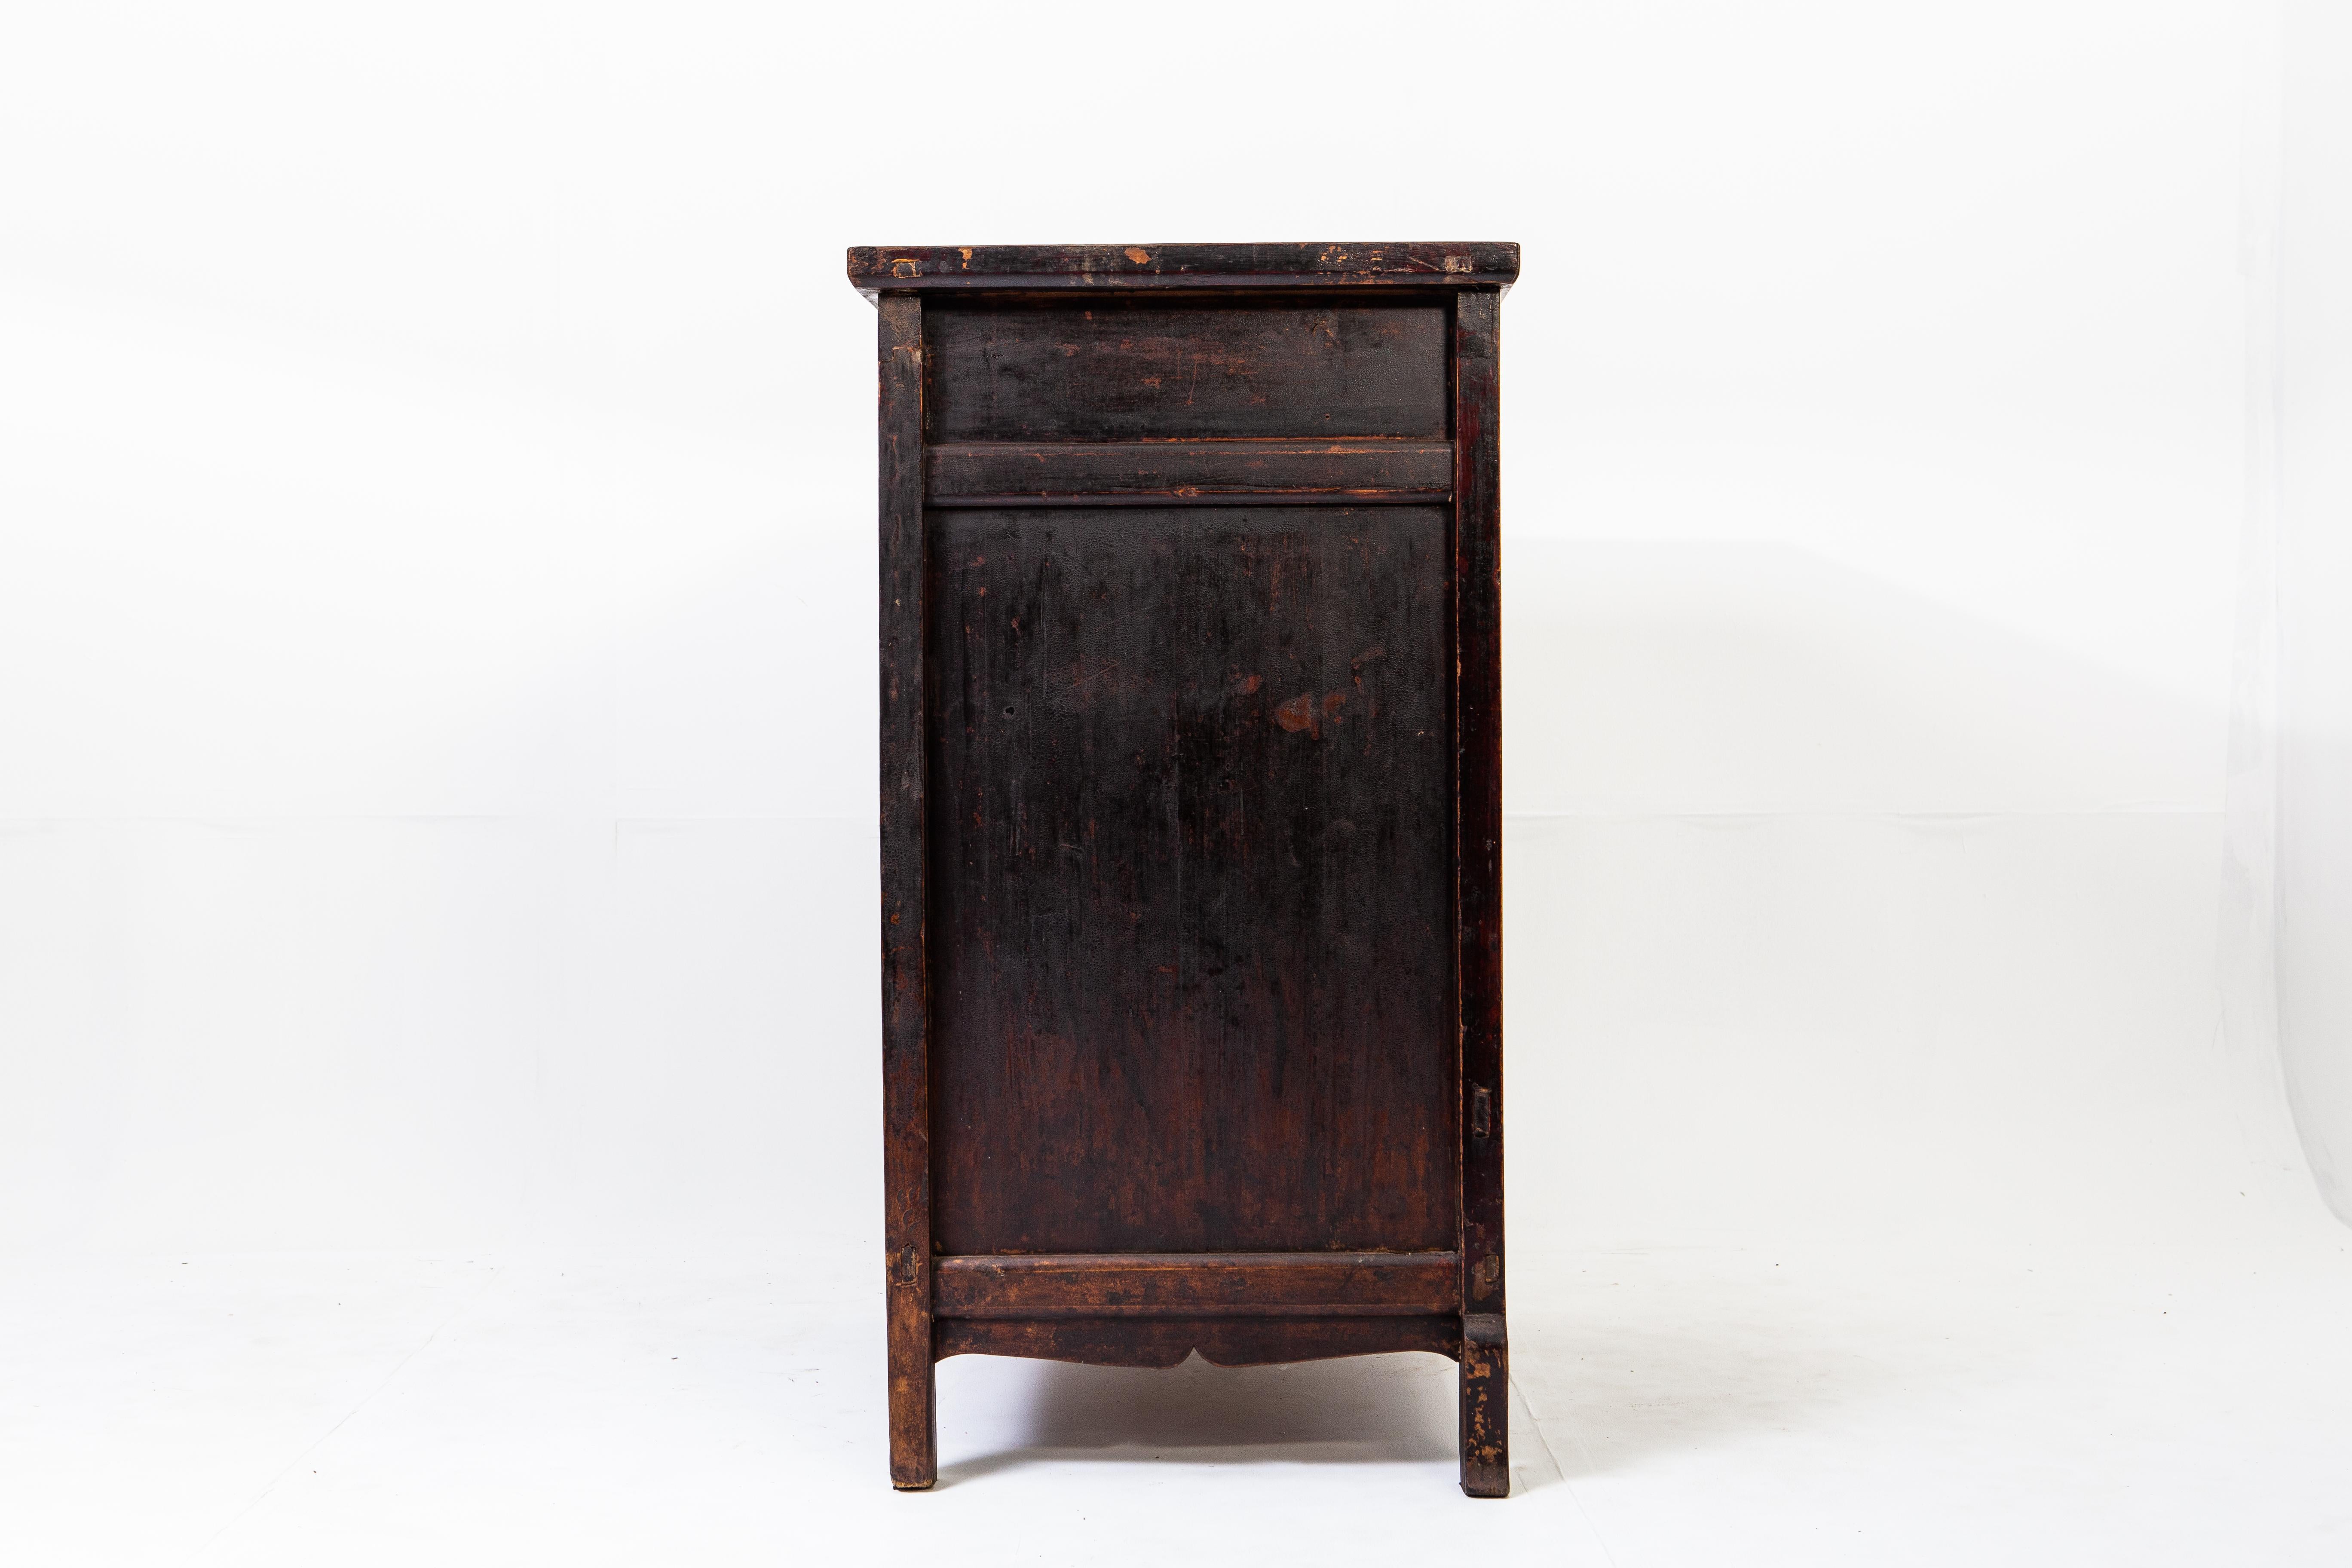 19th Century Late-Qing Dynasty Cabinet with Two Drawers and Two Doors